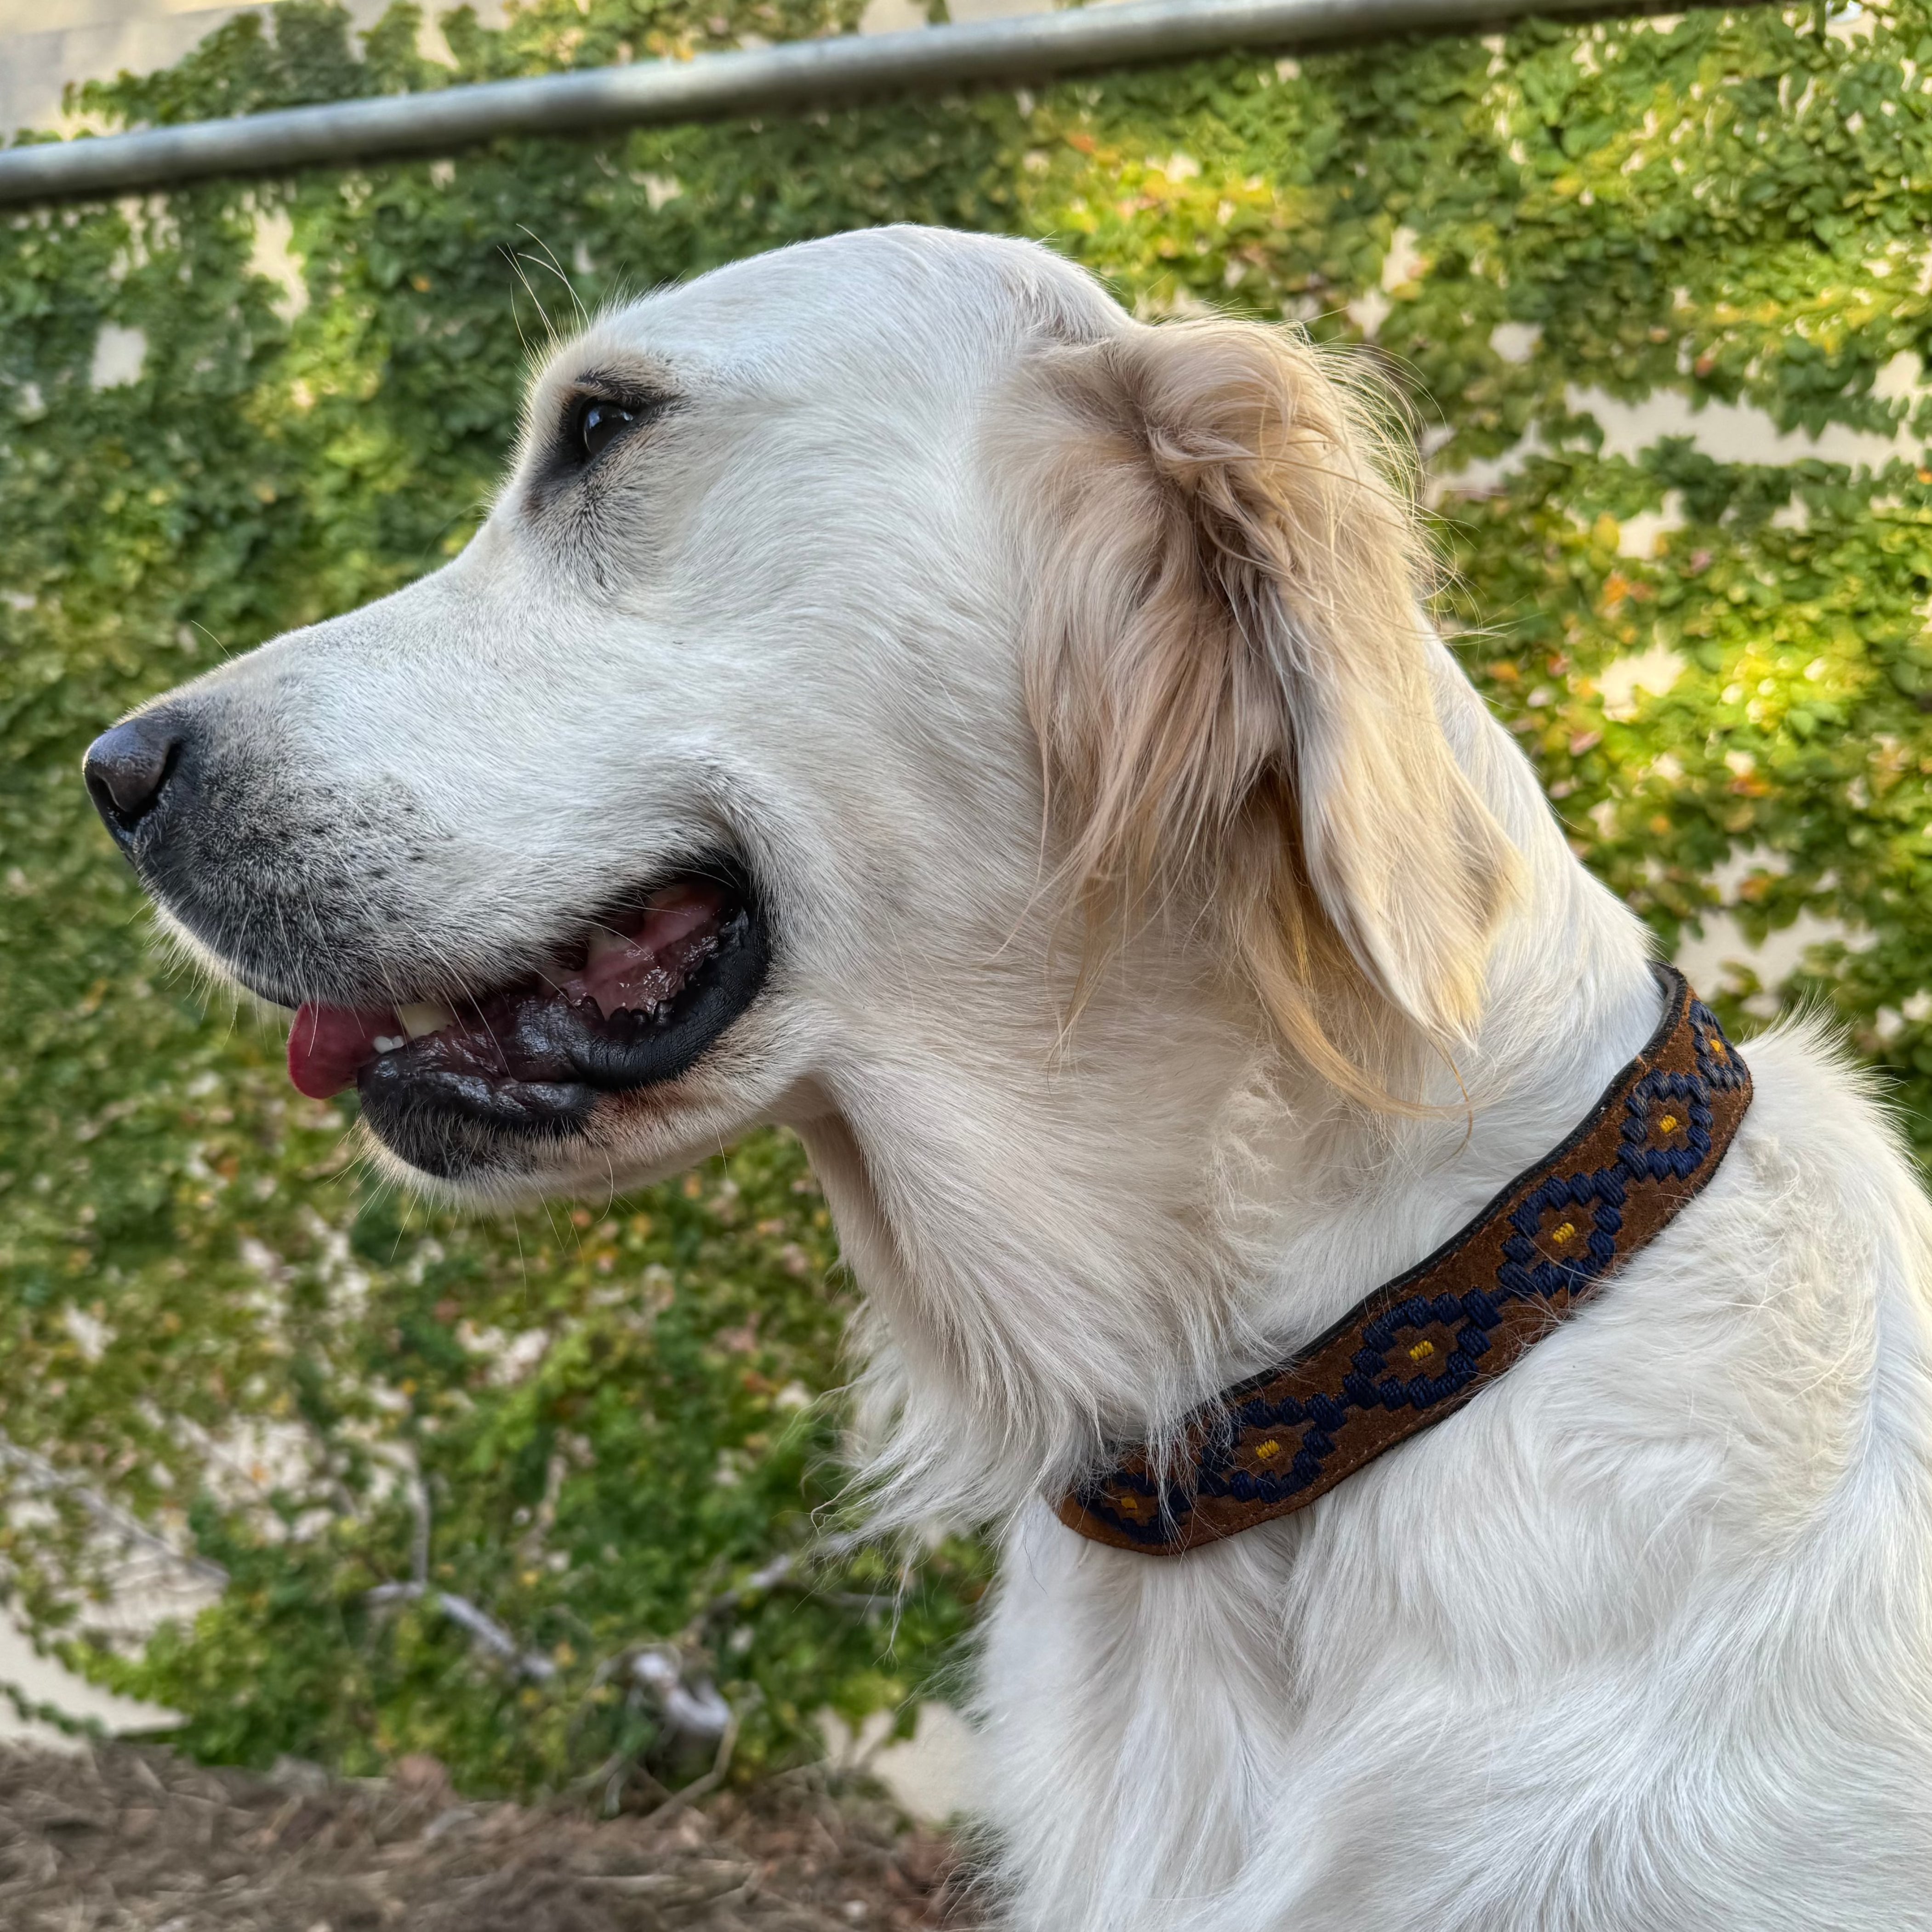 A golden retriever with a white and light golden coat is standing on a stone-paved surface. The dog is sporting a Georgie Paws Polo Collar - Sands in dark blue and orange patterns and is looking to the left with its mouth slightly open. Behind the dog, there is a wall covered with green ivy.